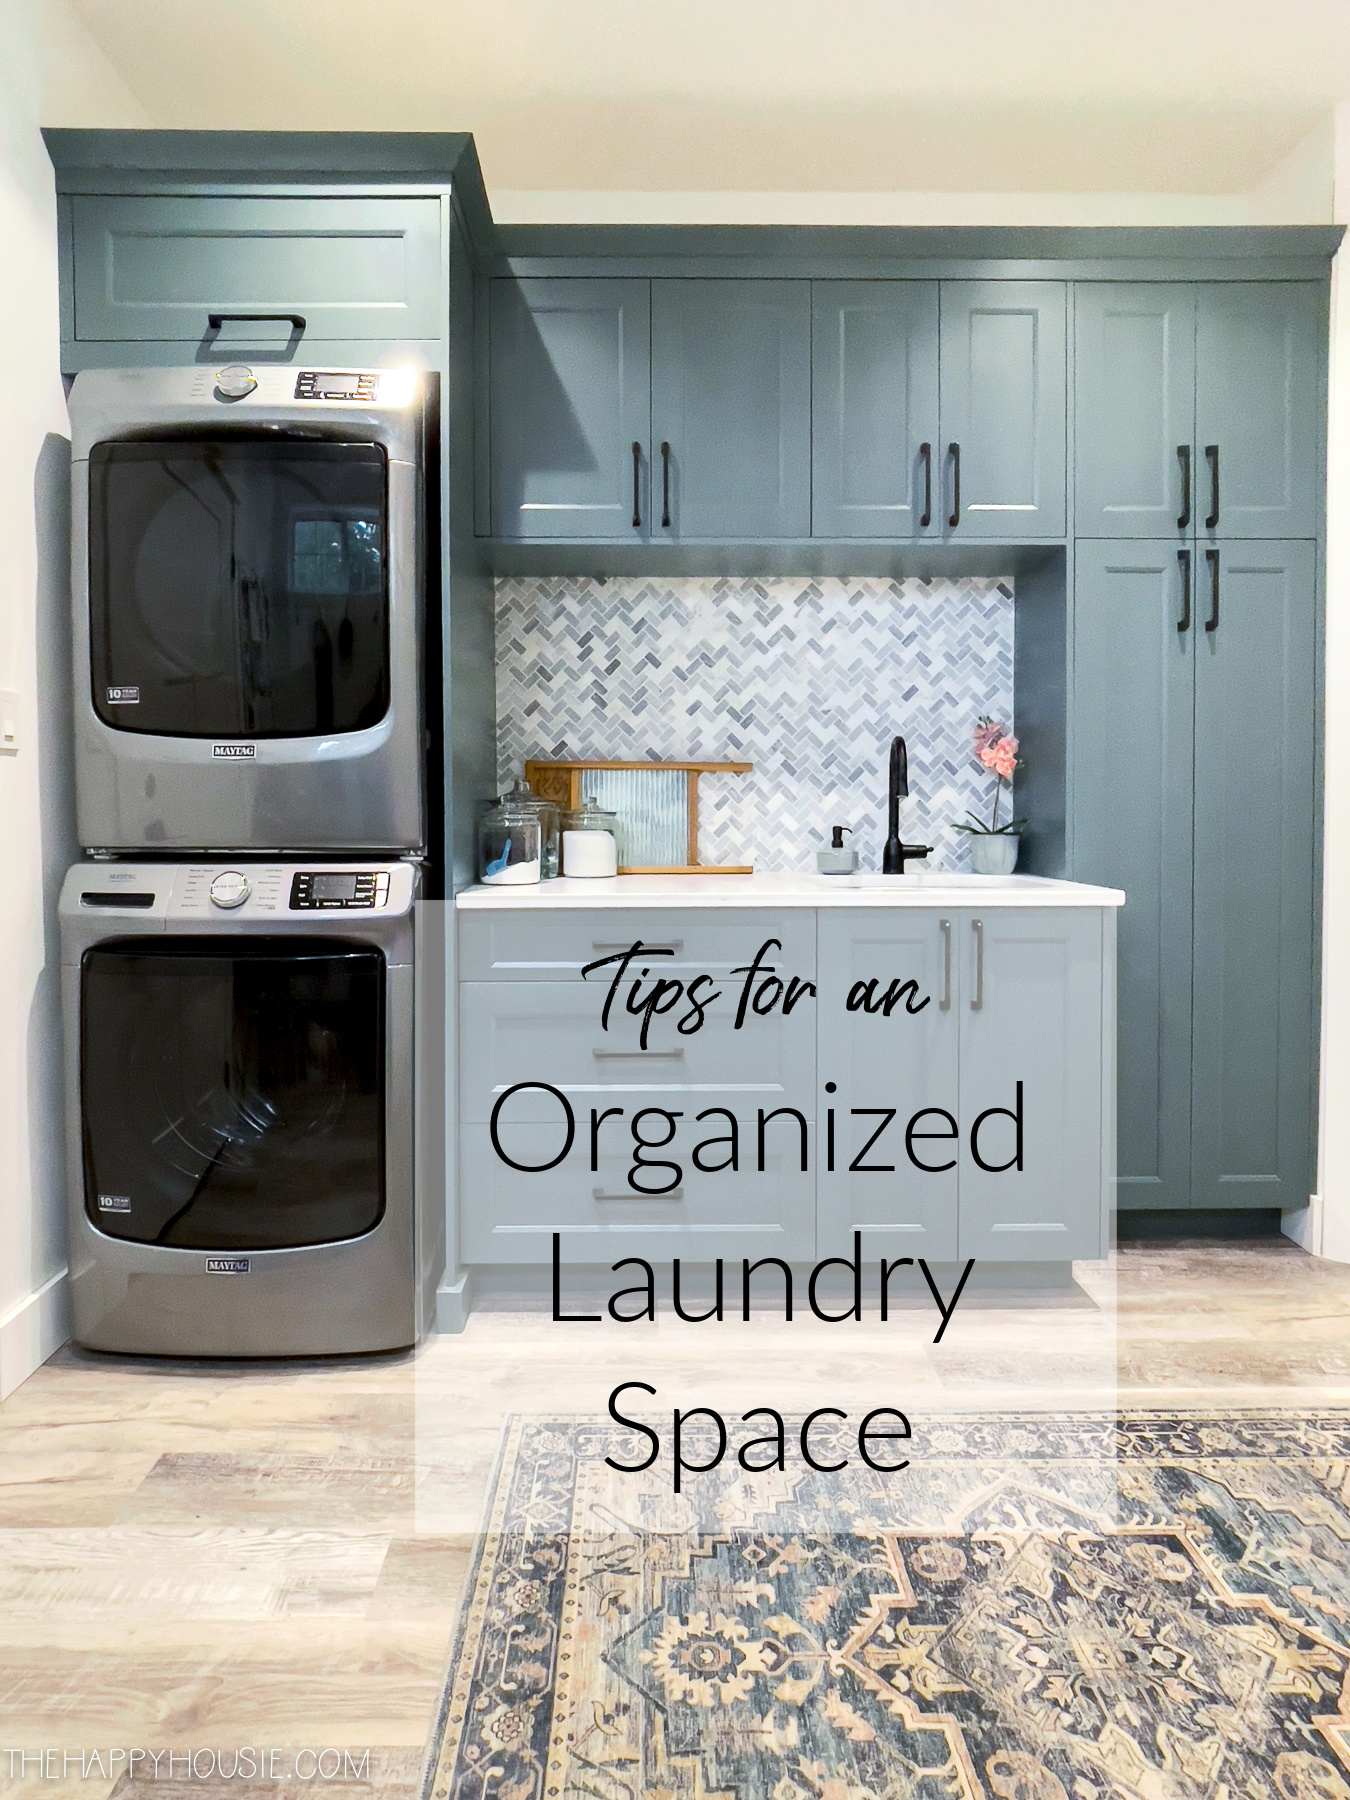 https://www.thehappyhousie.com/wp-content/uploads/2022/01/tips-for-an-organized-laundry-space.jpg